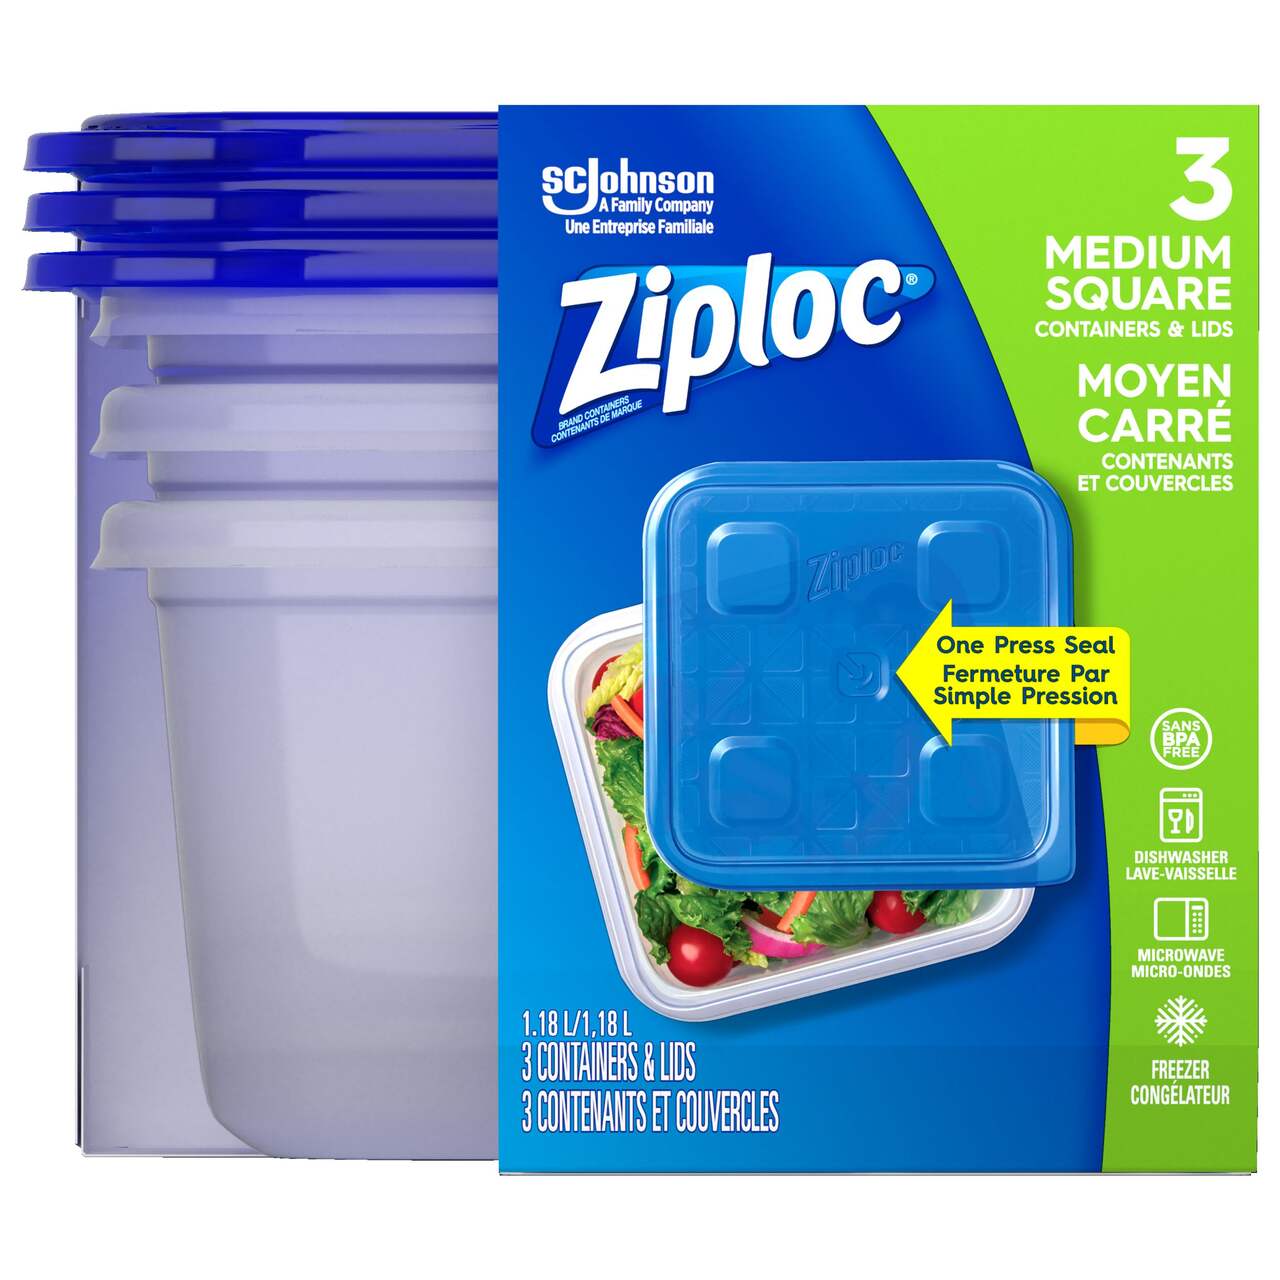 Ziploc 70935 4 Count 3-Cup Food Storage Containers - Quantity of 18